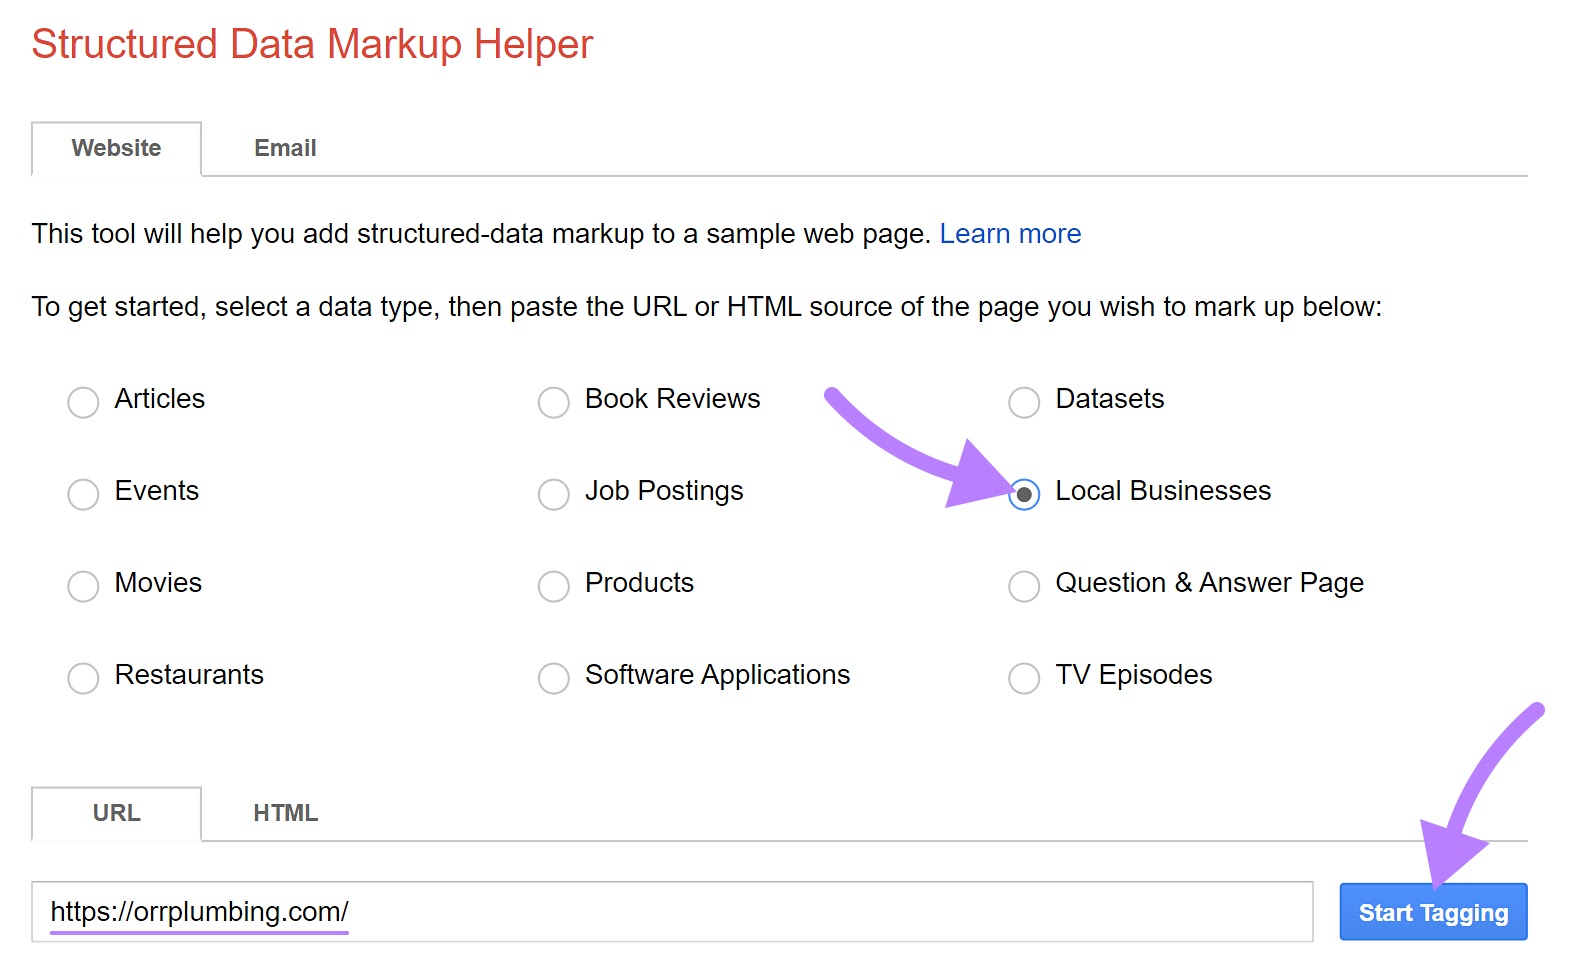 "Local Business" option selected in Structured Data Markup Helper